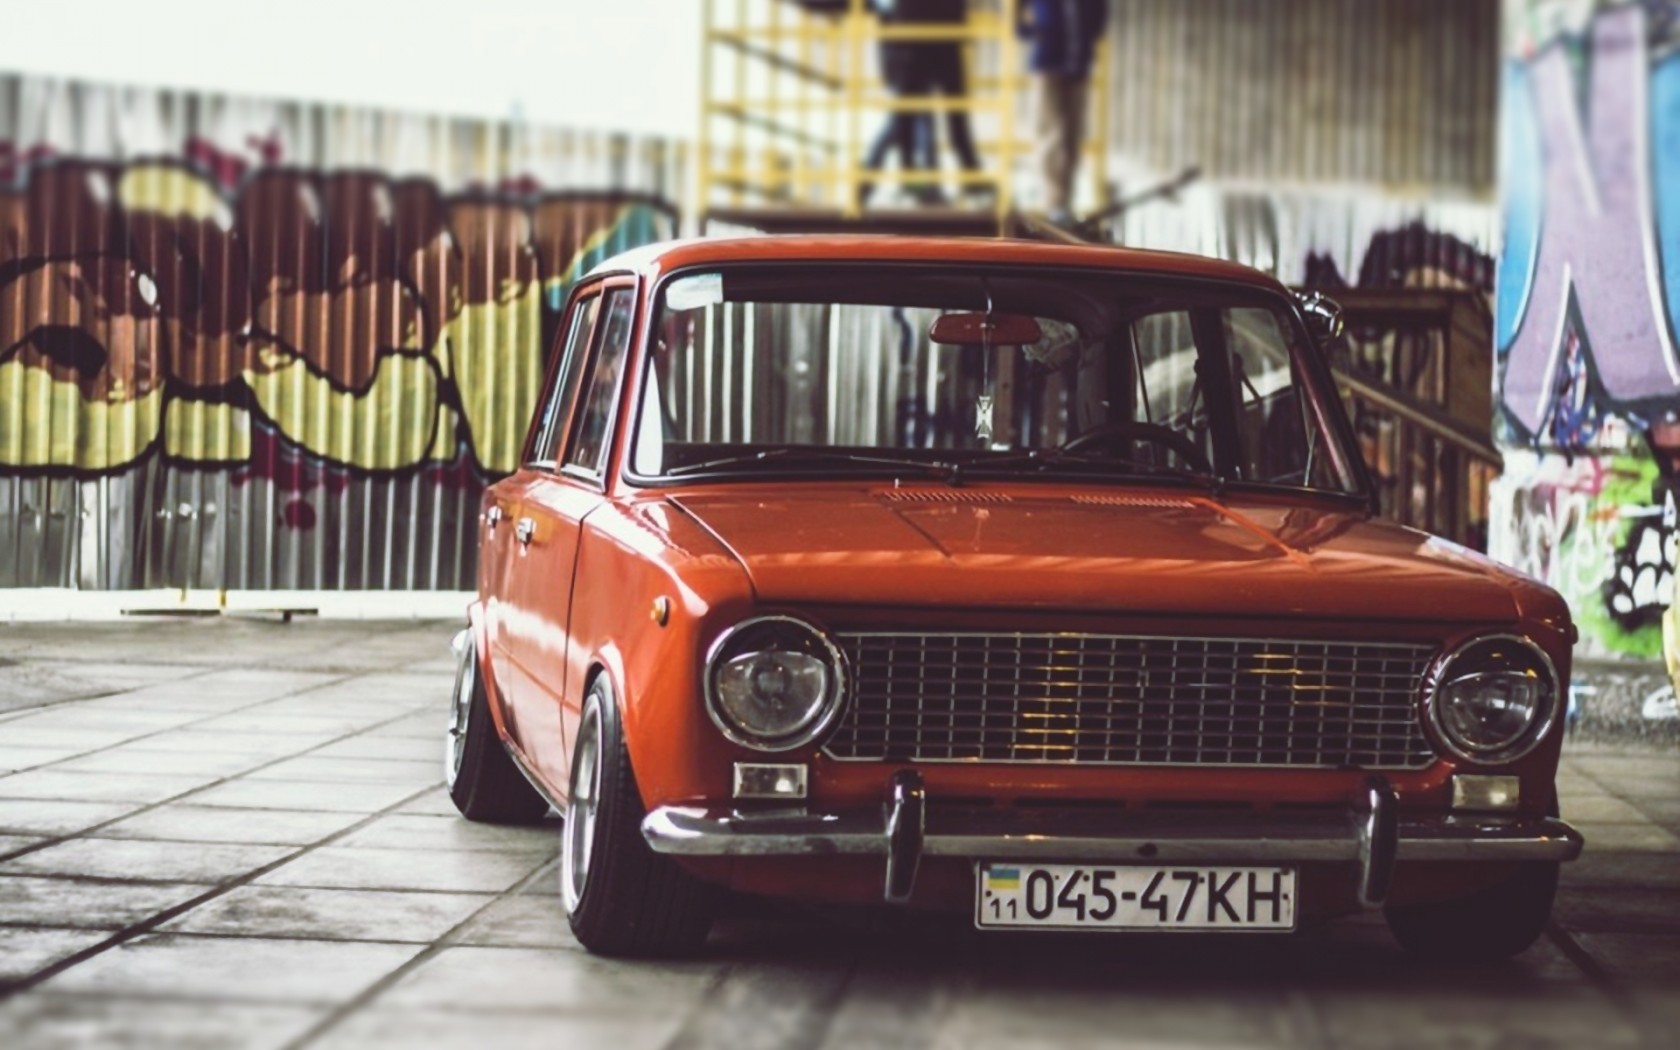 Wallpaper, 1680x1050 px, LADA, Lada low, old car, Russian cars, Stance, VAZ 2101 1680x1050